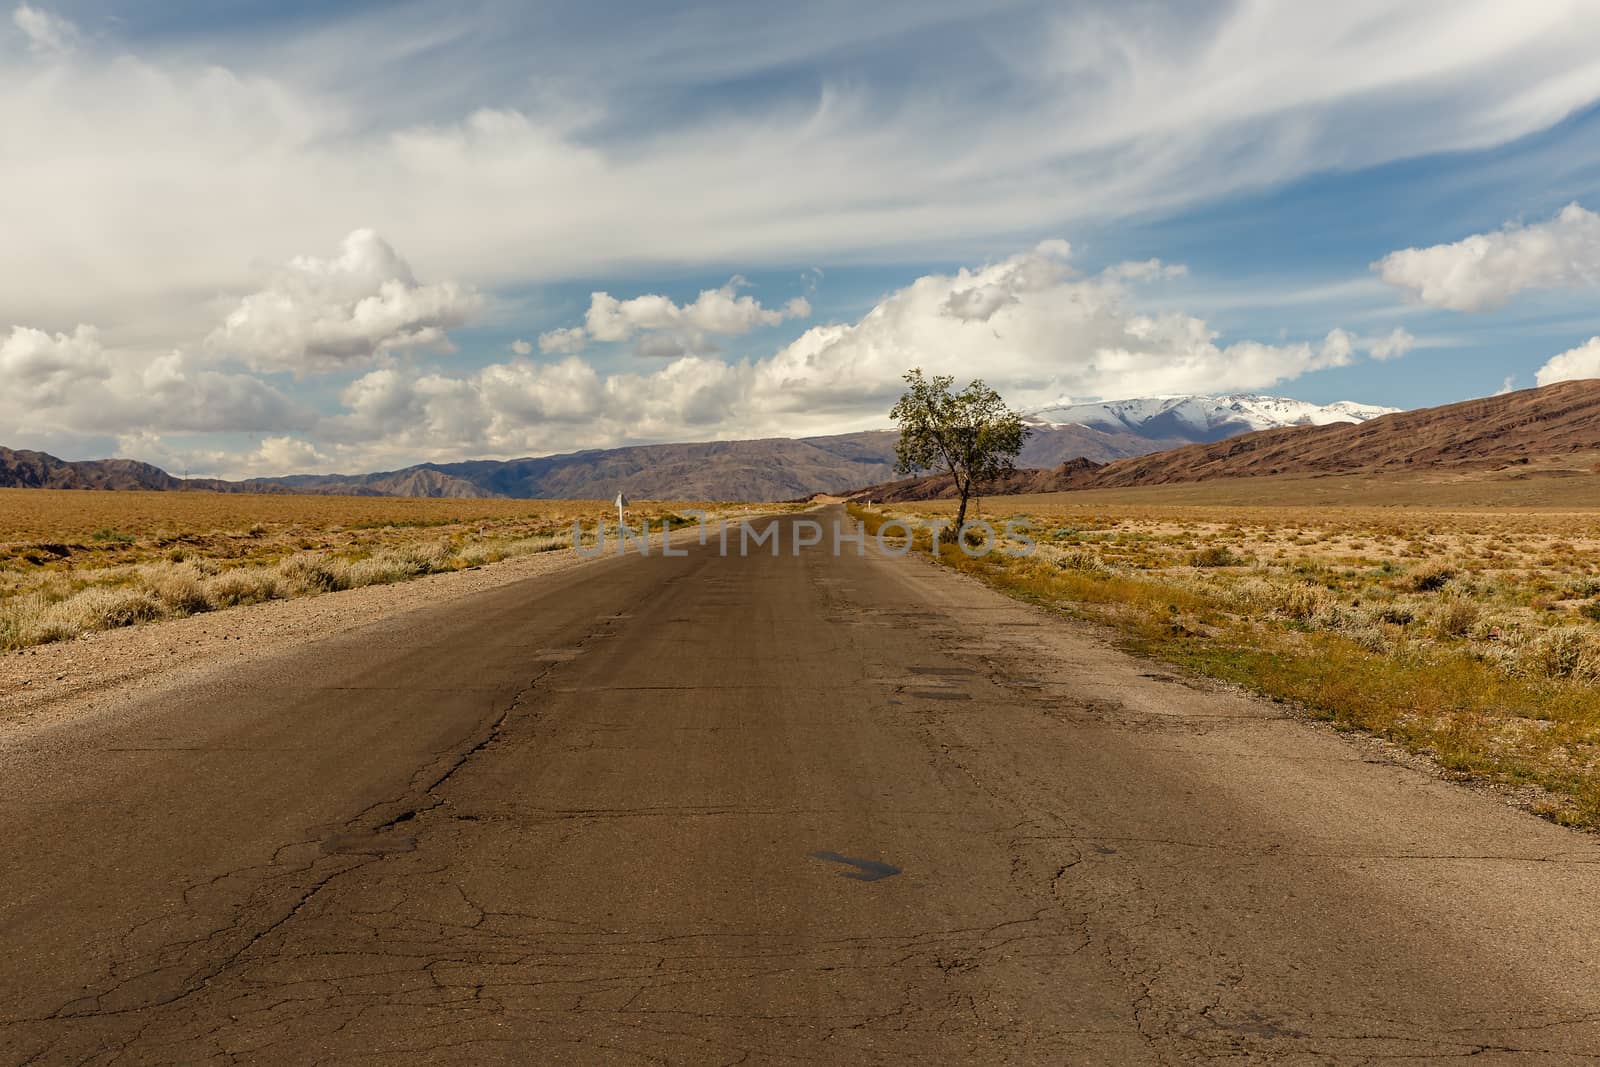 A 365 highway, passing in the Issyk-Kul Region, Kyrgyzstan by Mieszko9